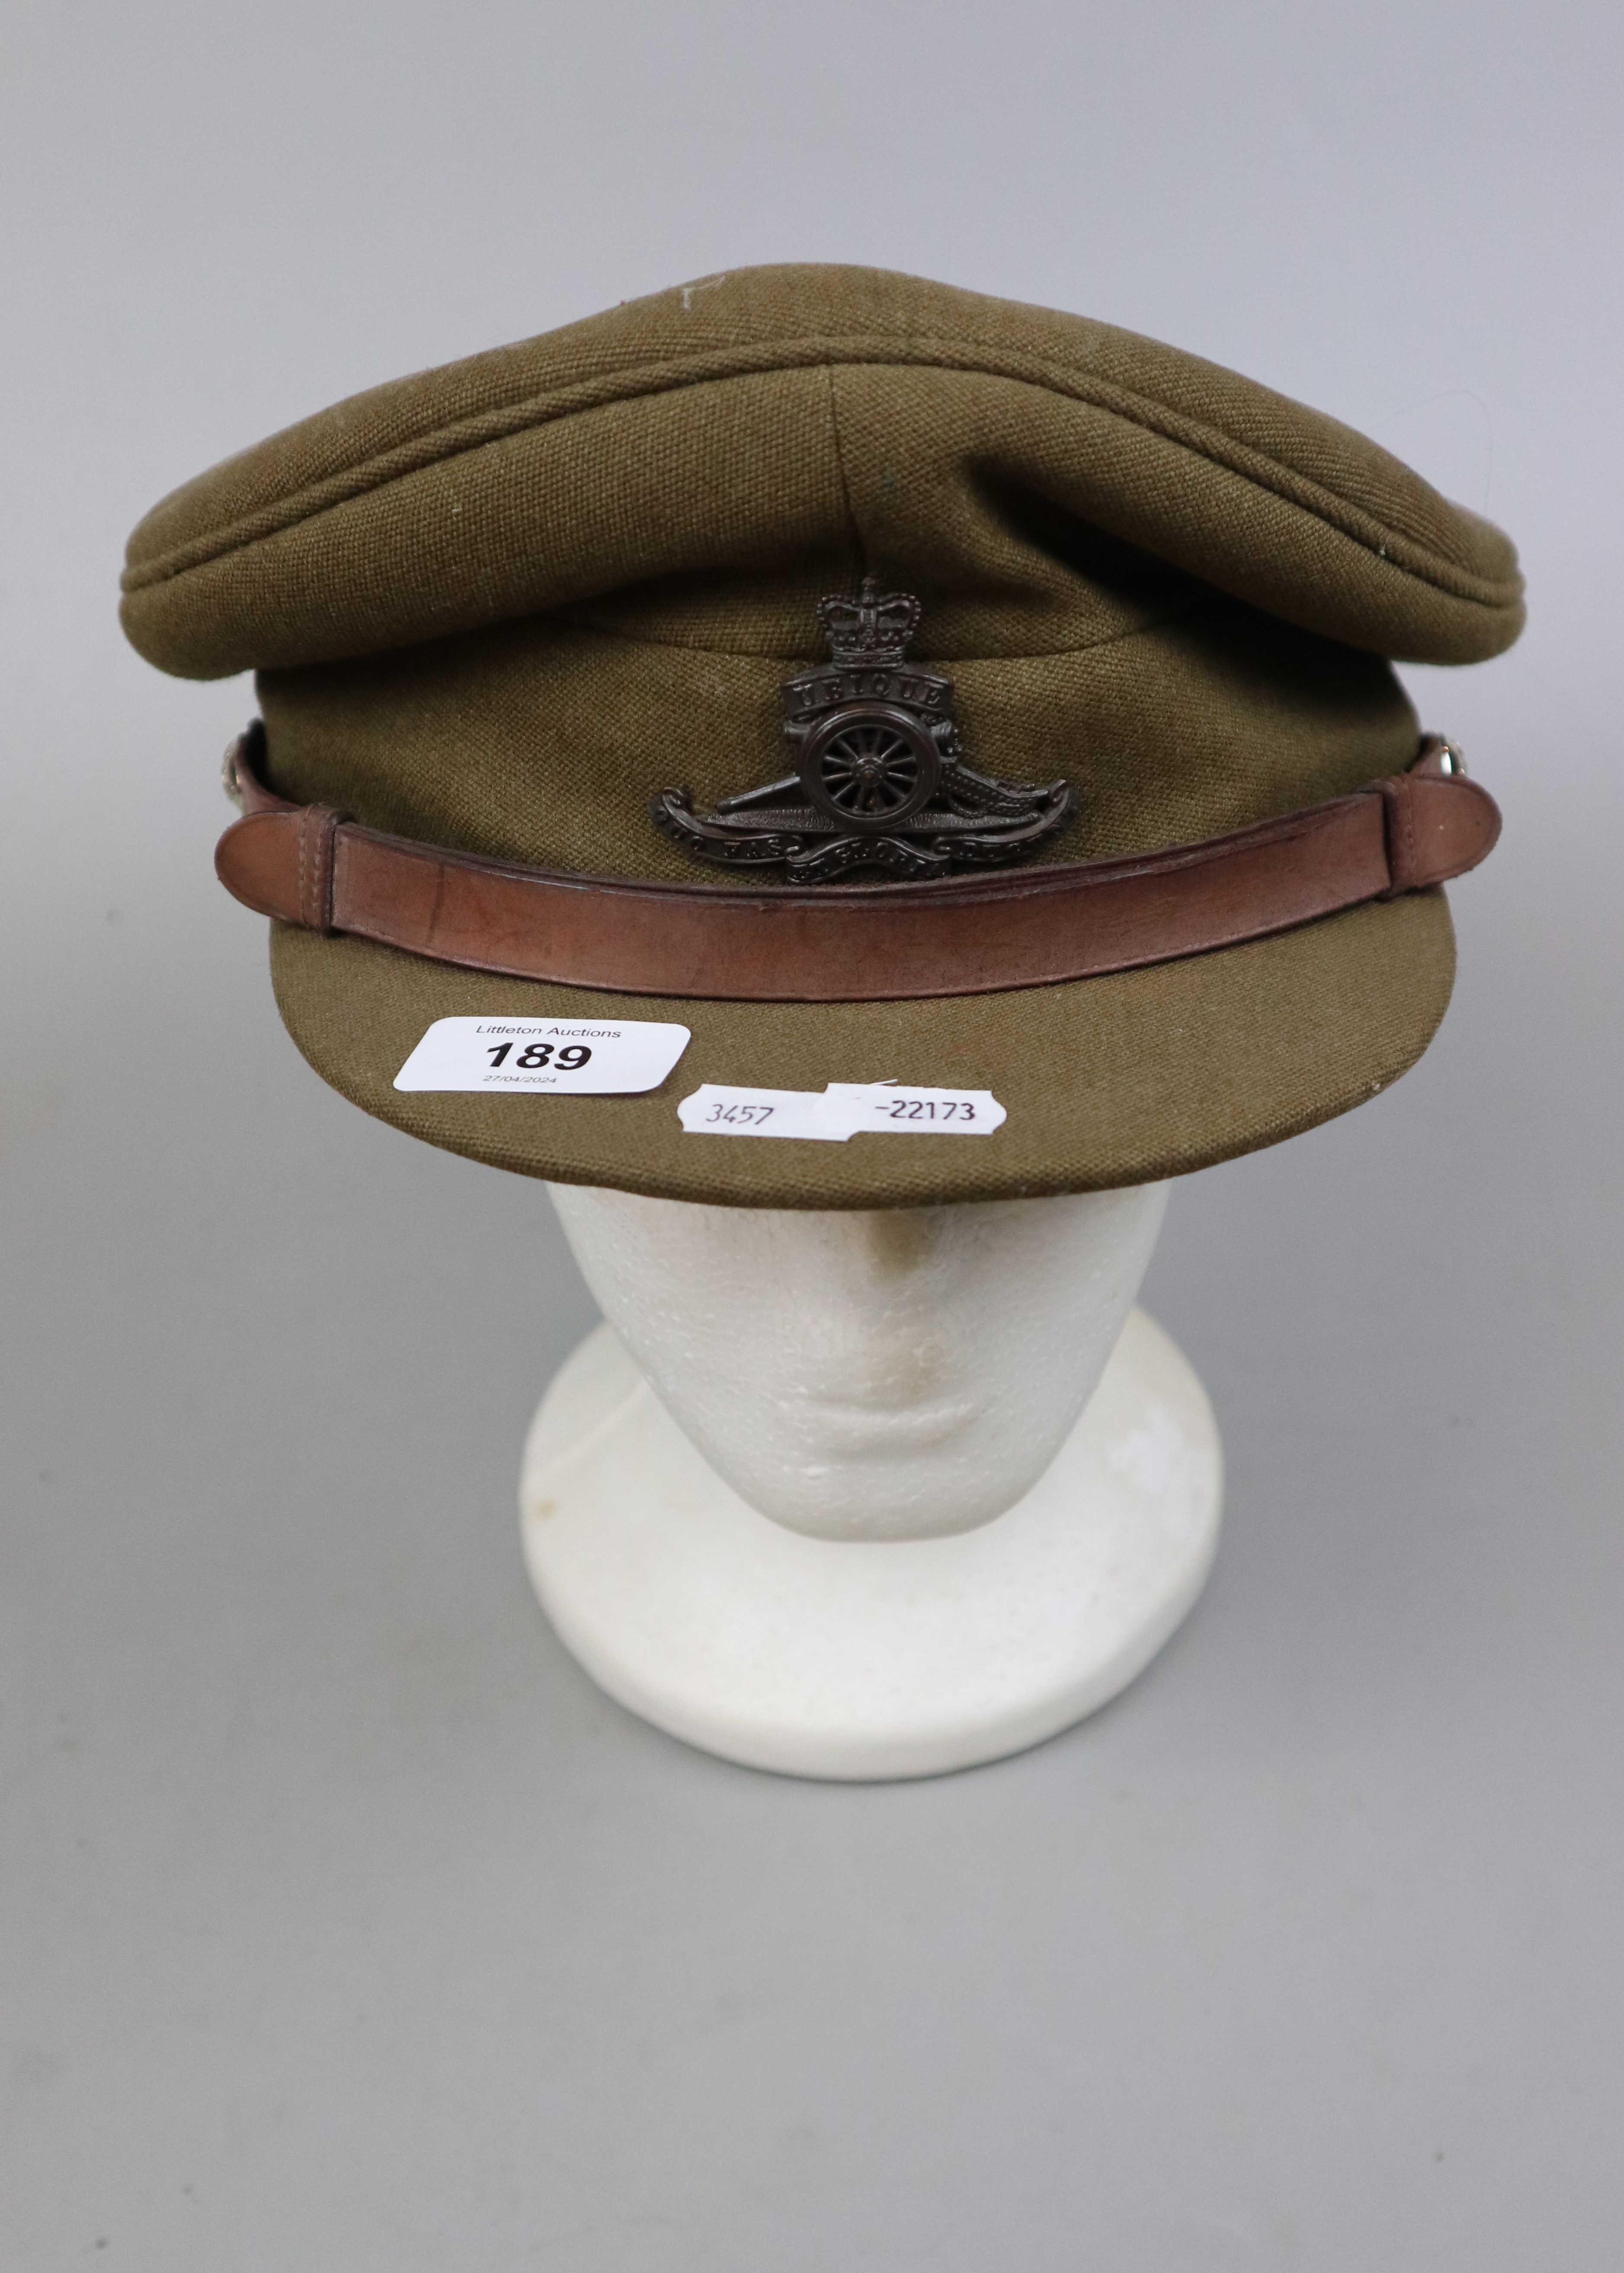 WWI officers army cap - Royal Artillery - Image 3 of 6